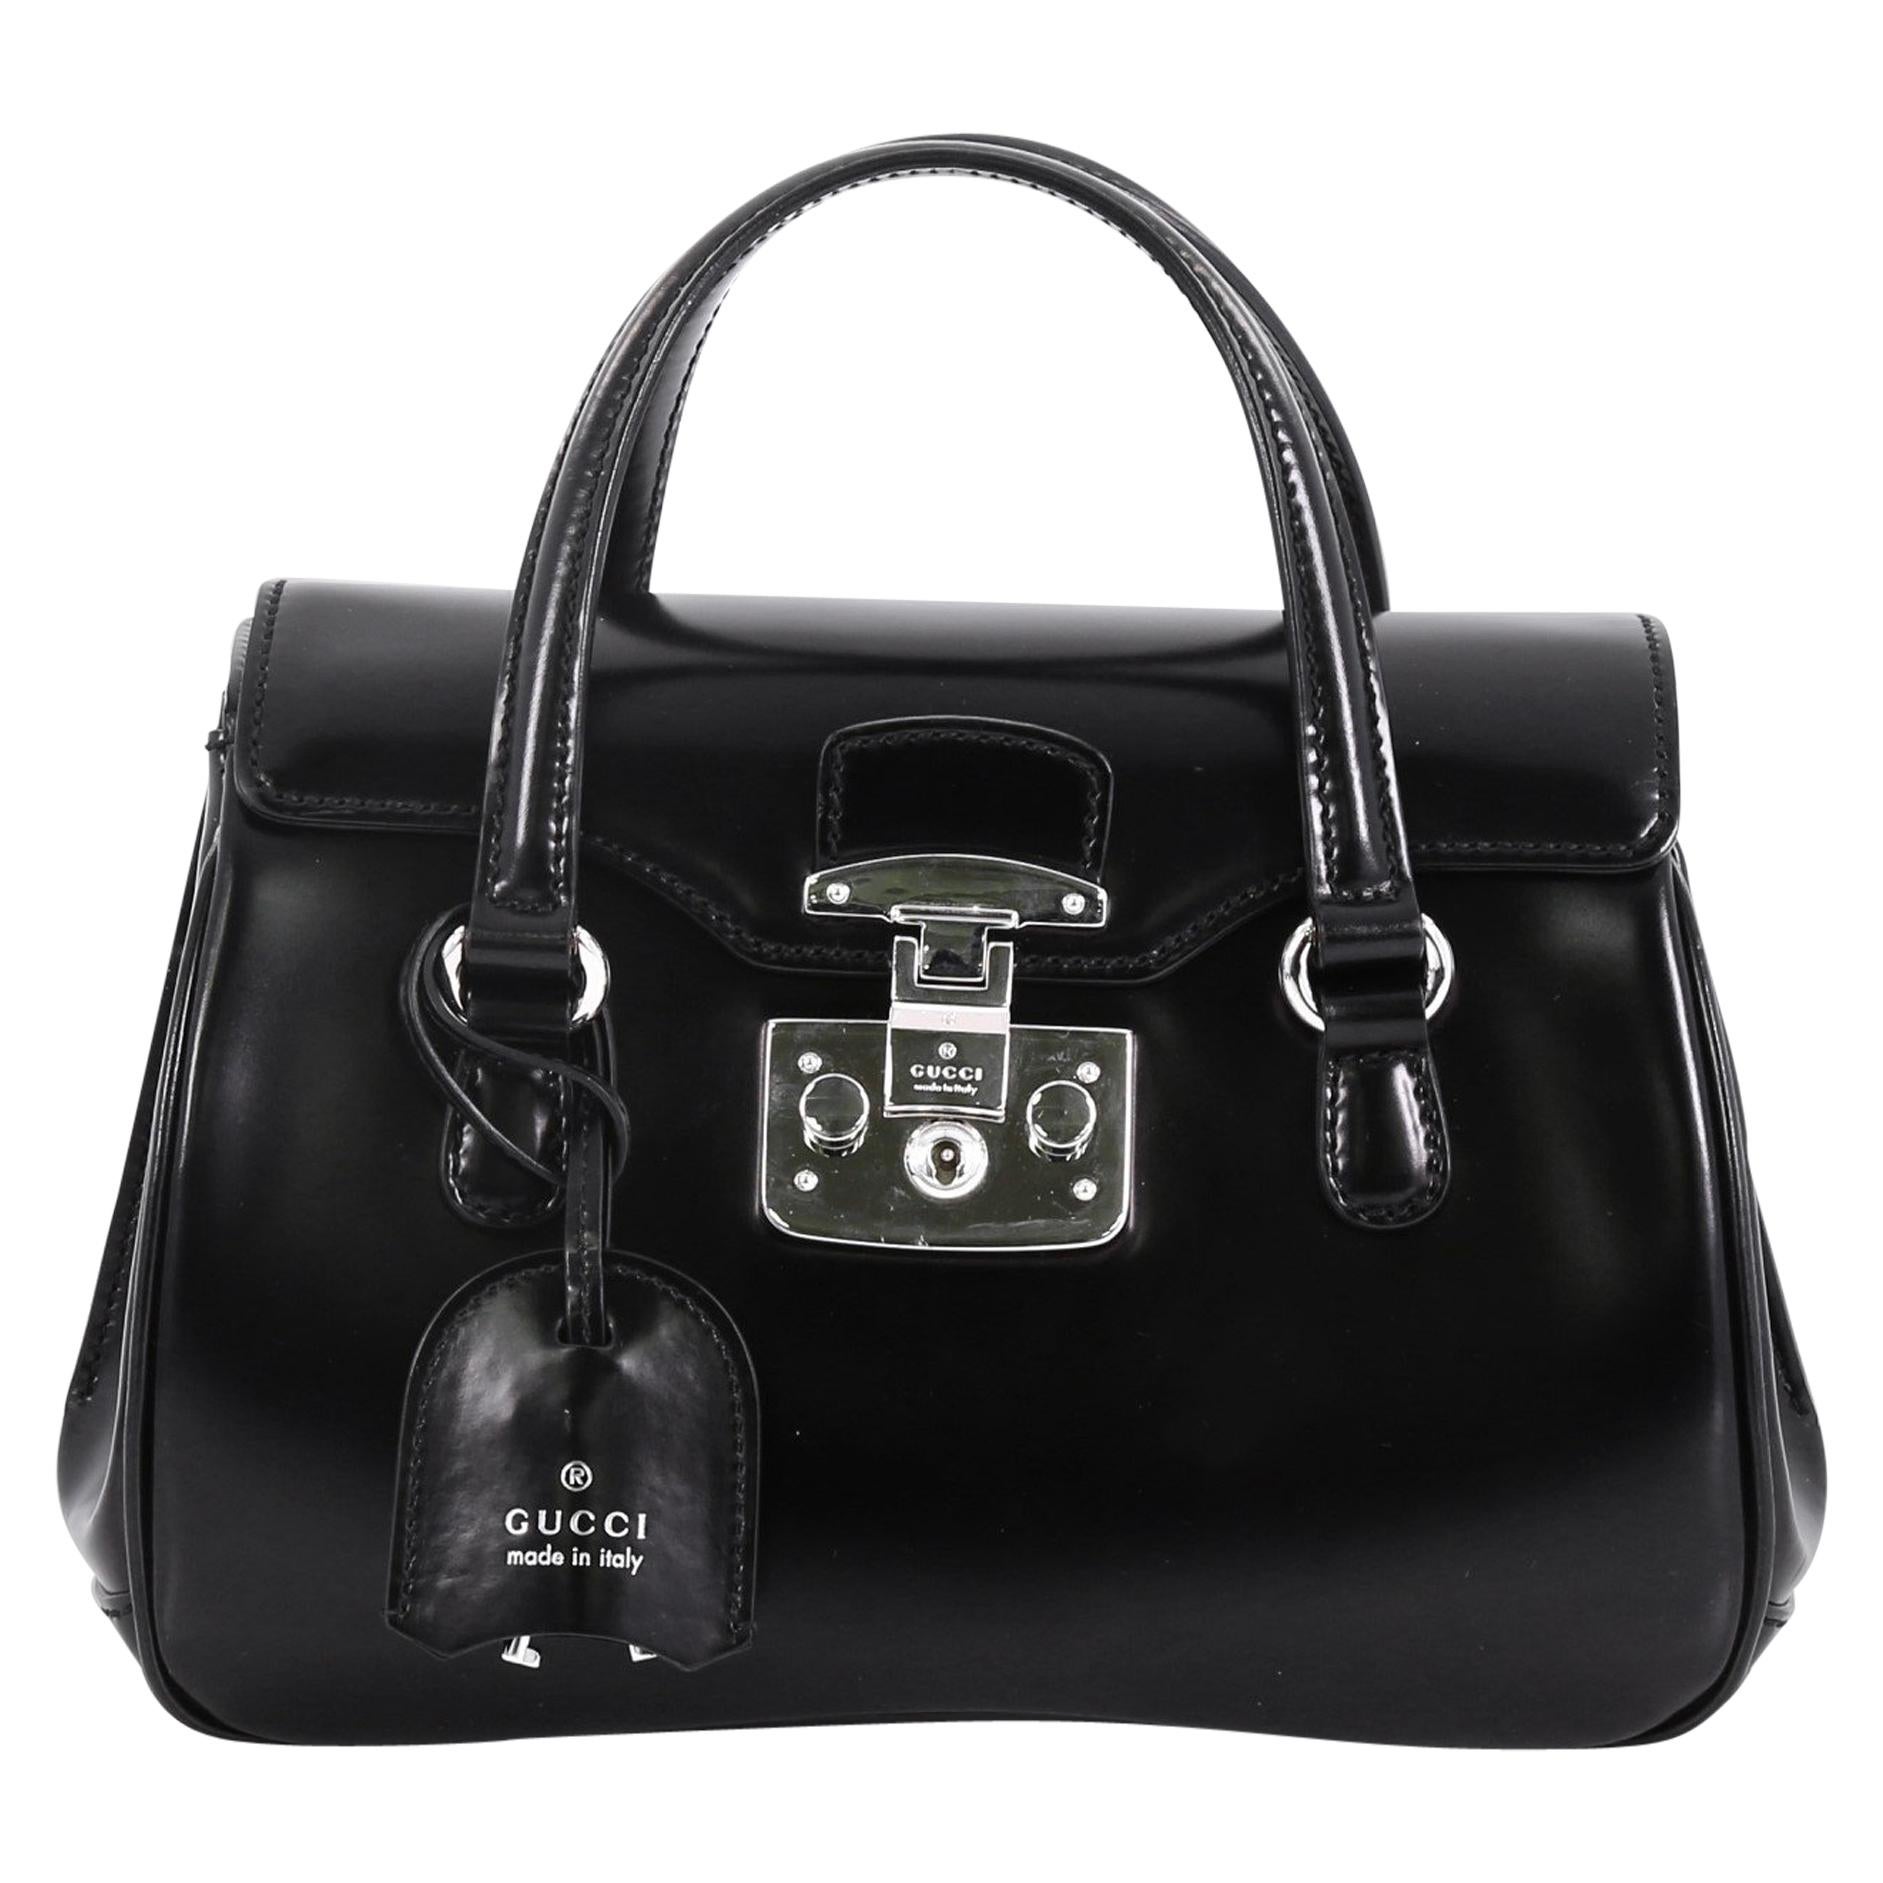 Gucci Lady Lock Satchel Leather Small, crafted in black glazed leather